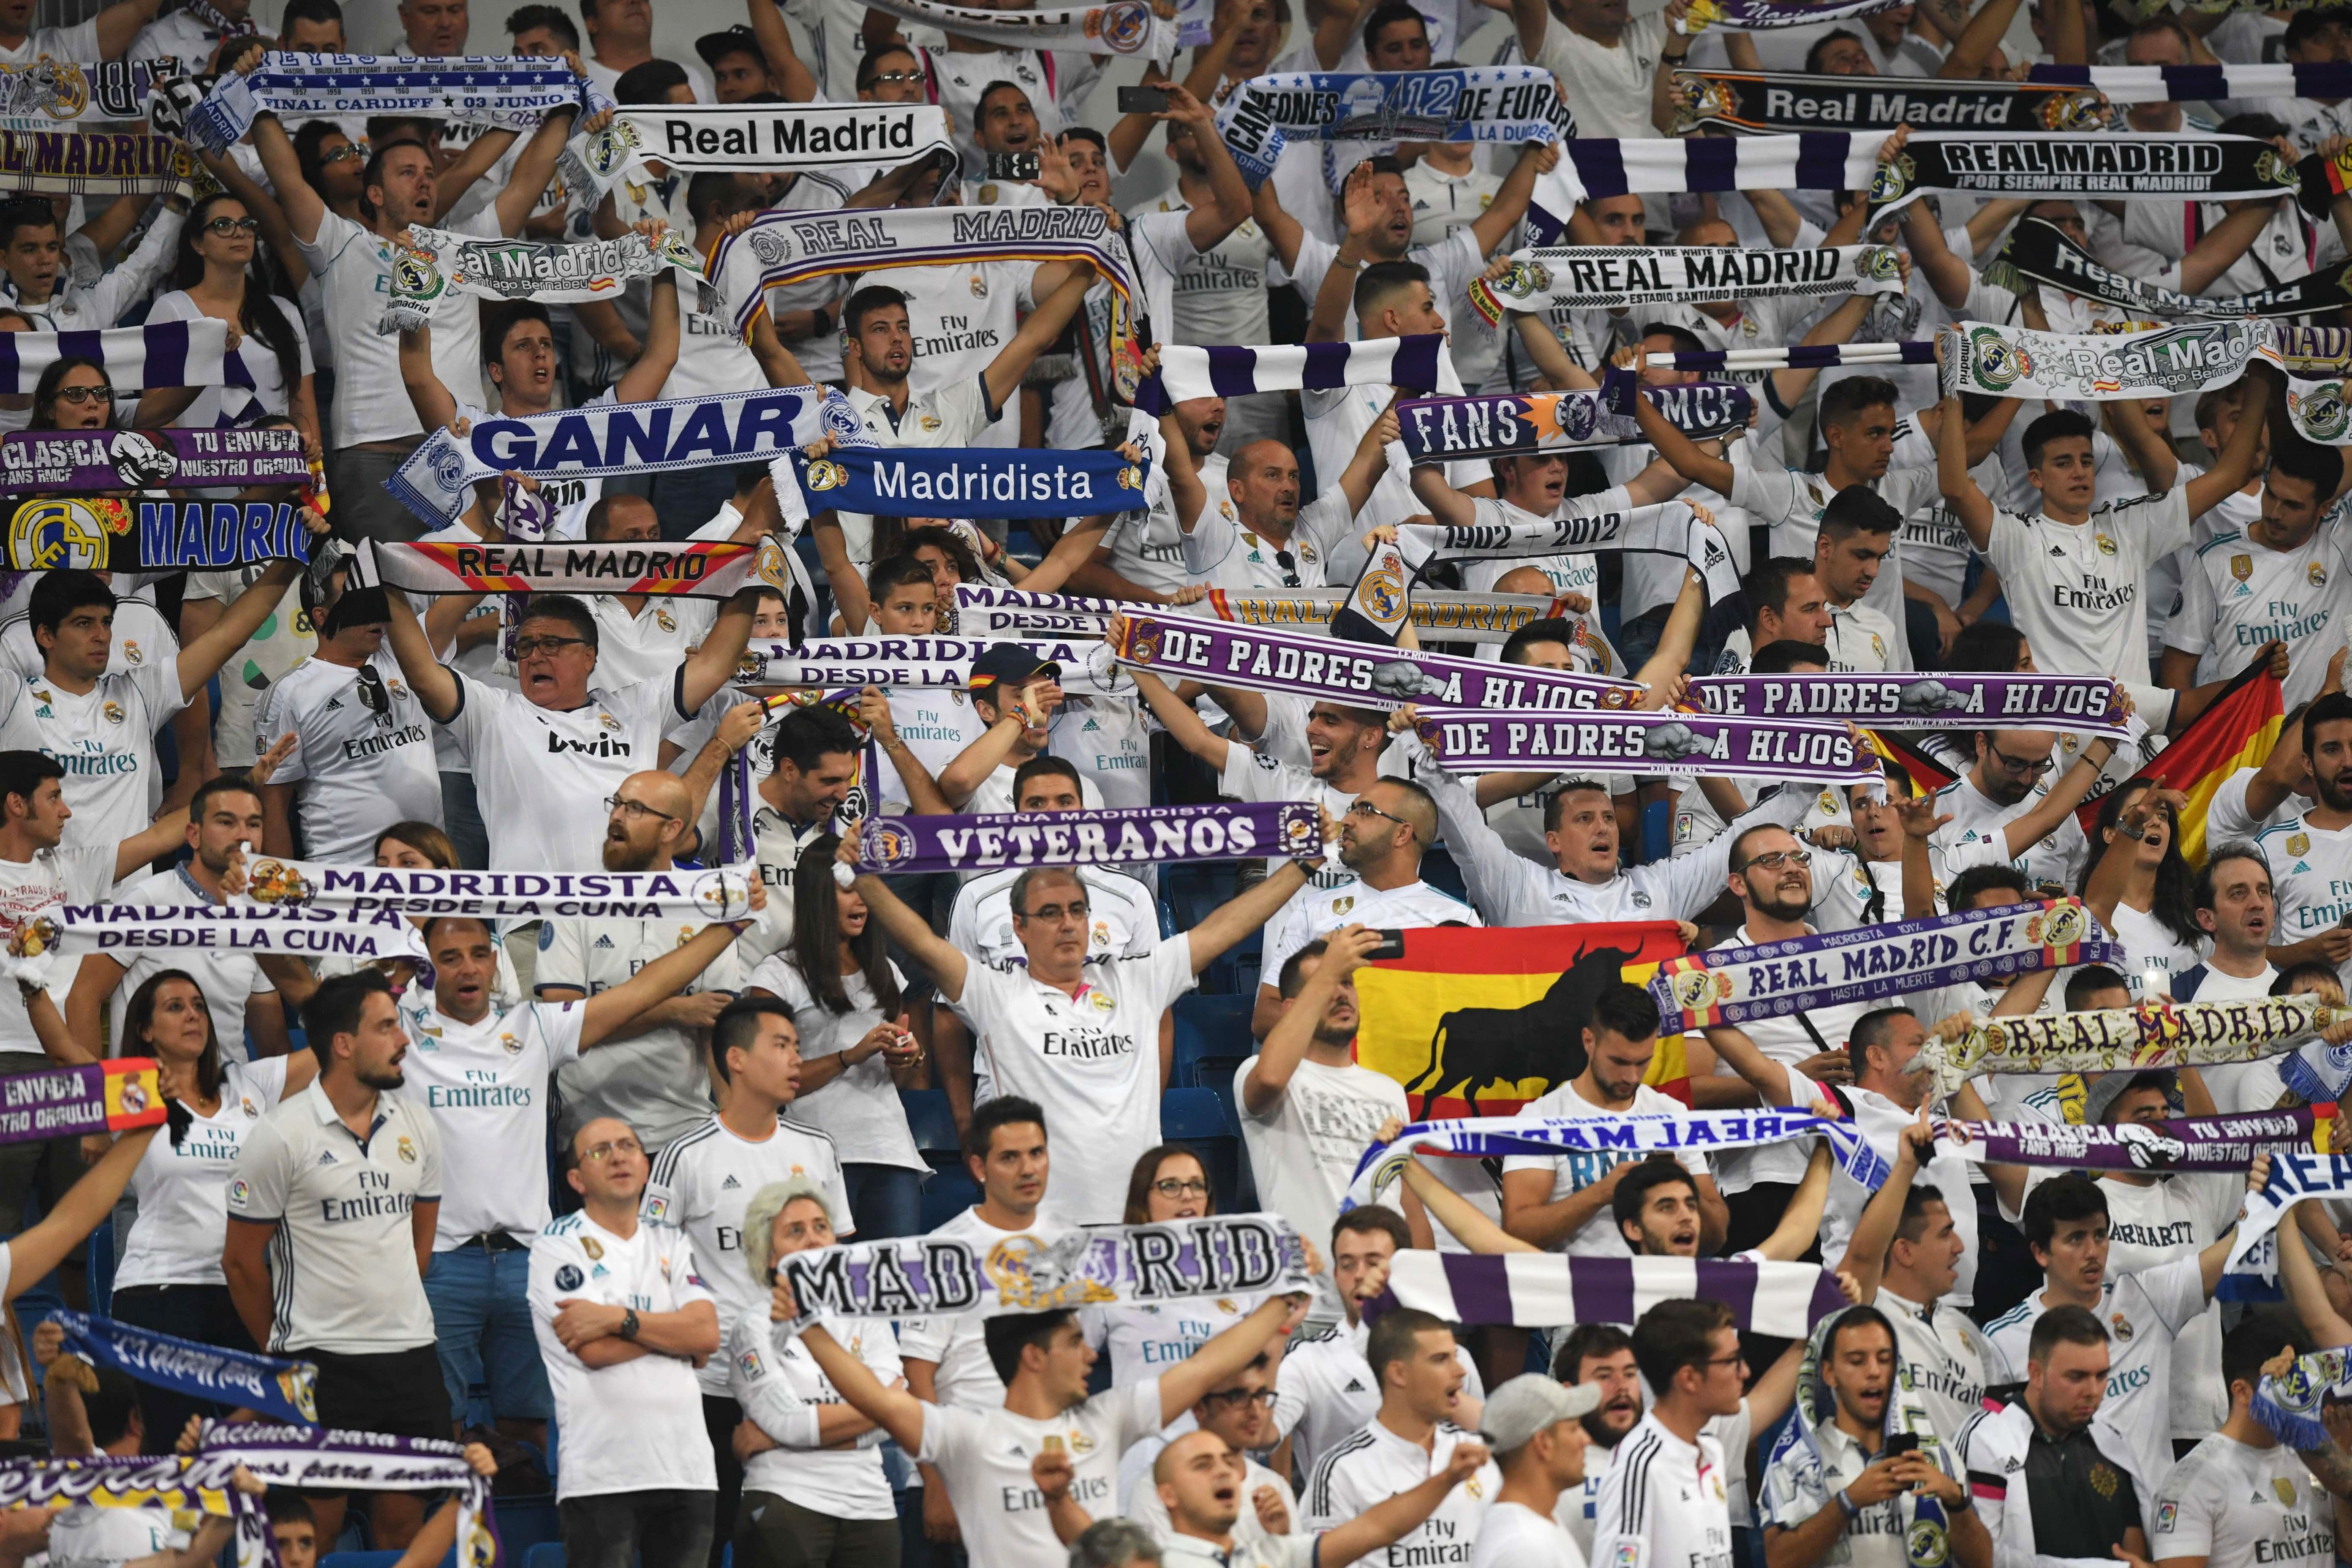 Real Madrid's fans brandish their scarfs before the UEFA Champions League football match Real Madrid CF vs APOEL FC at the Santiago Bernabeu stadium in Madrid on September 13, 2017. / AFP PHOTO / GABRIEL BOUYS        (Photo credit should read GABRIEL BOUYS/AFP/Getty Images)